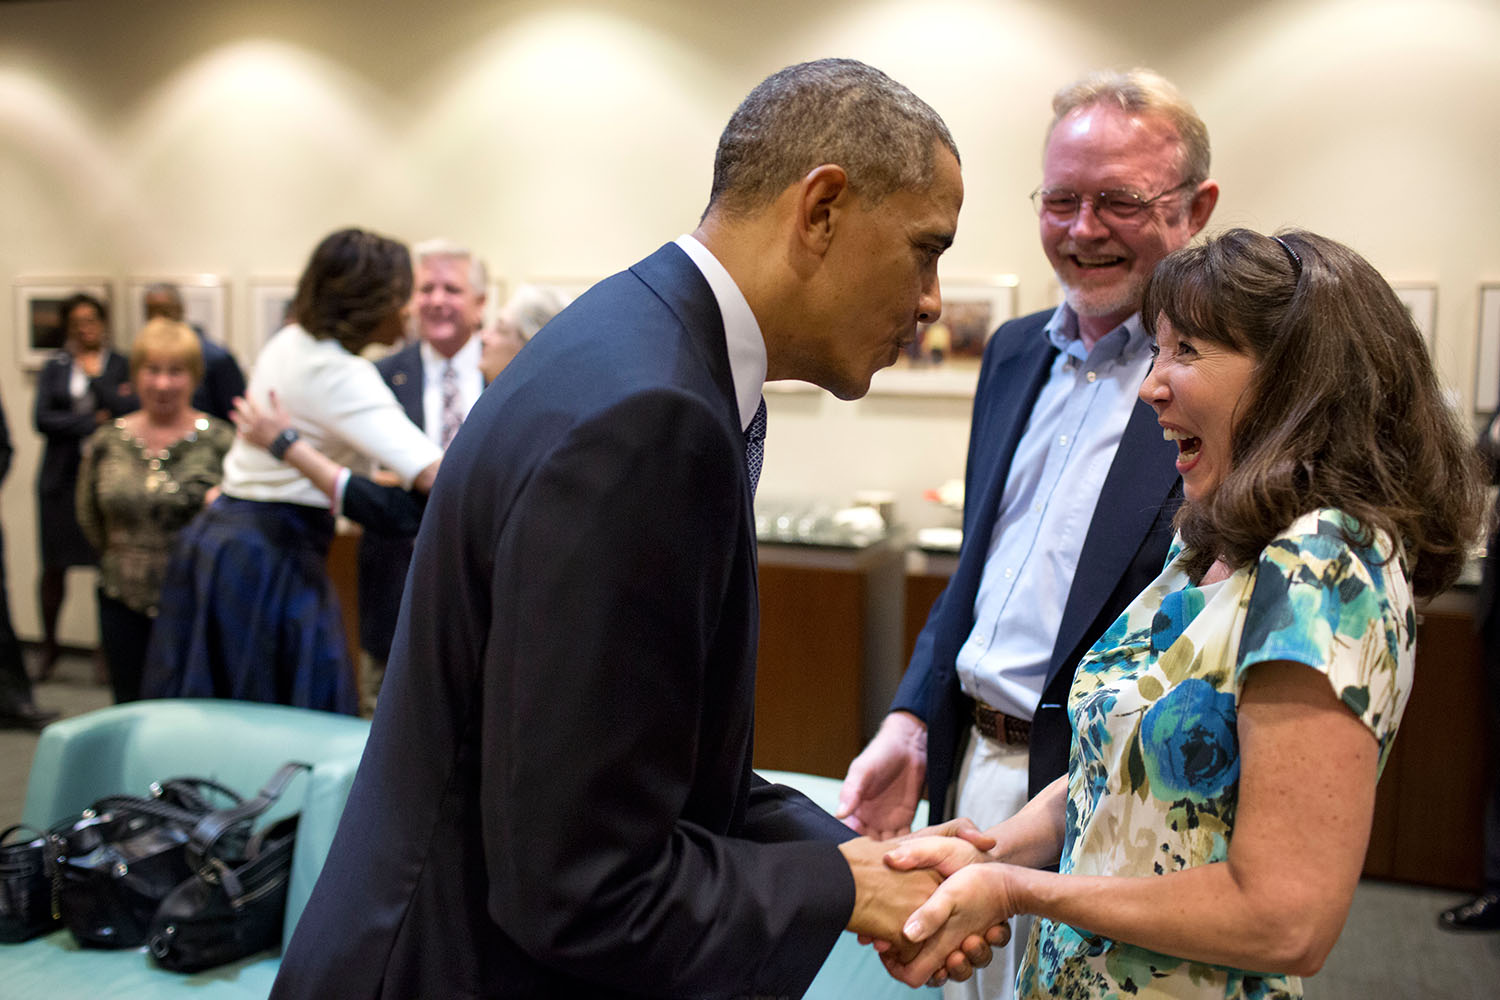 President Obama meets with folks who benefitted from the ACA